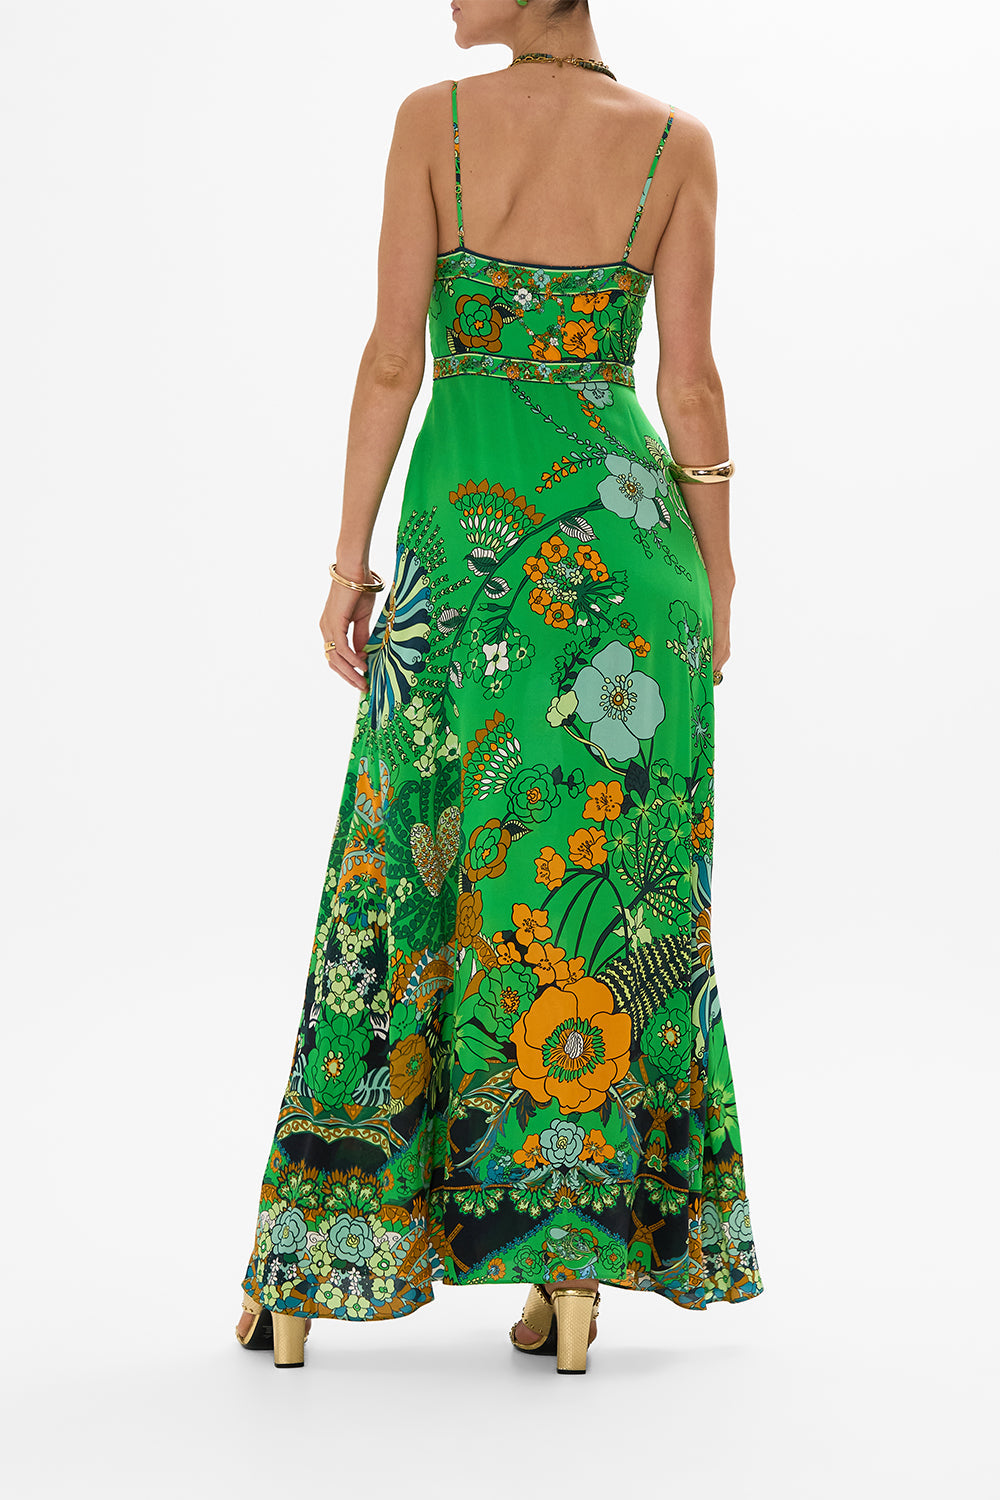 TIE FRONT CUT OUT MAXI DRESS GOOD VIBES GENERATION